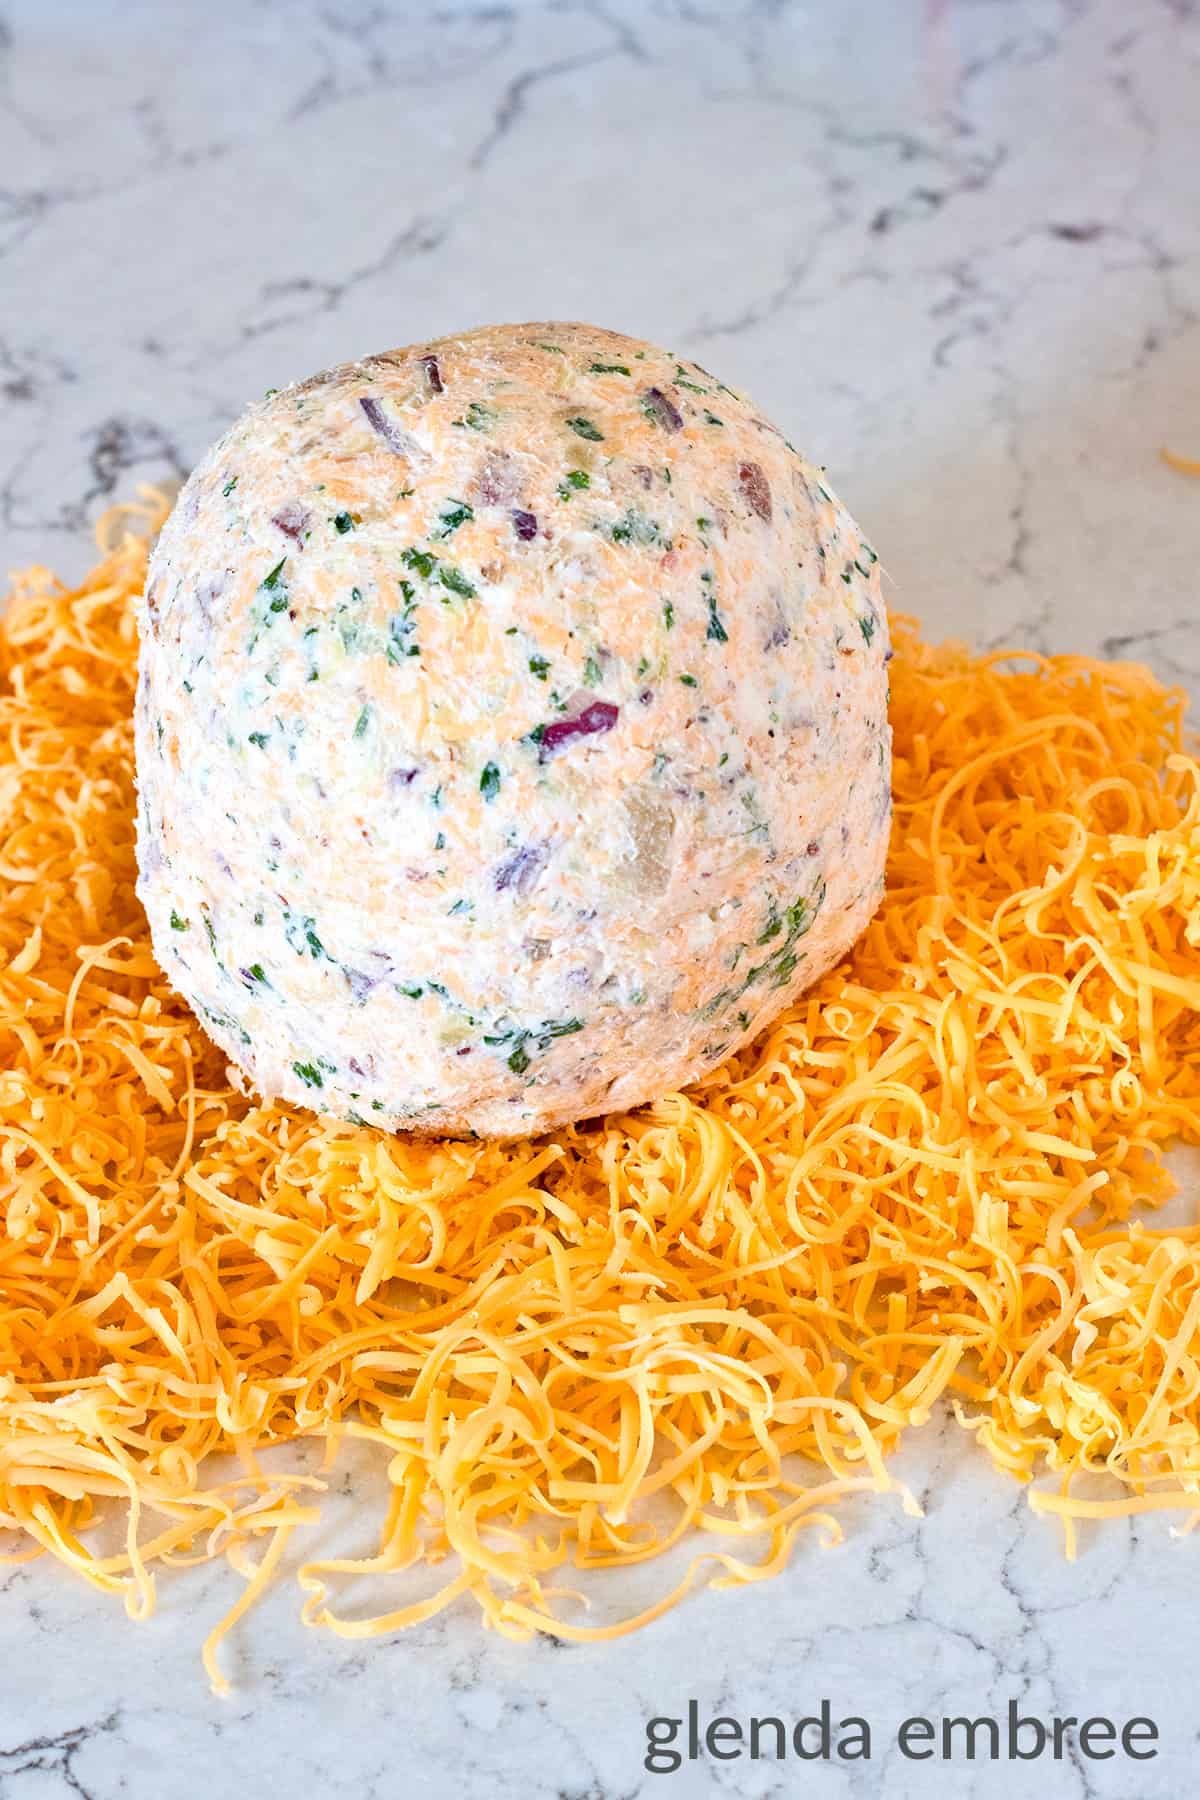 Bacon and Pineapple Cheese Ball in the center of a pile of grated Cheddar cheese on a marble counter